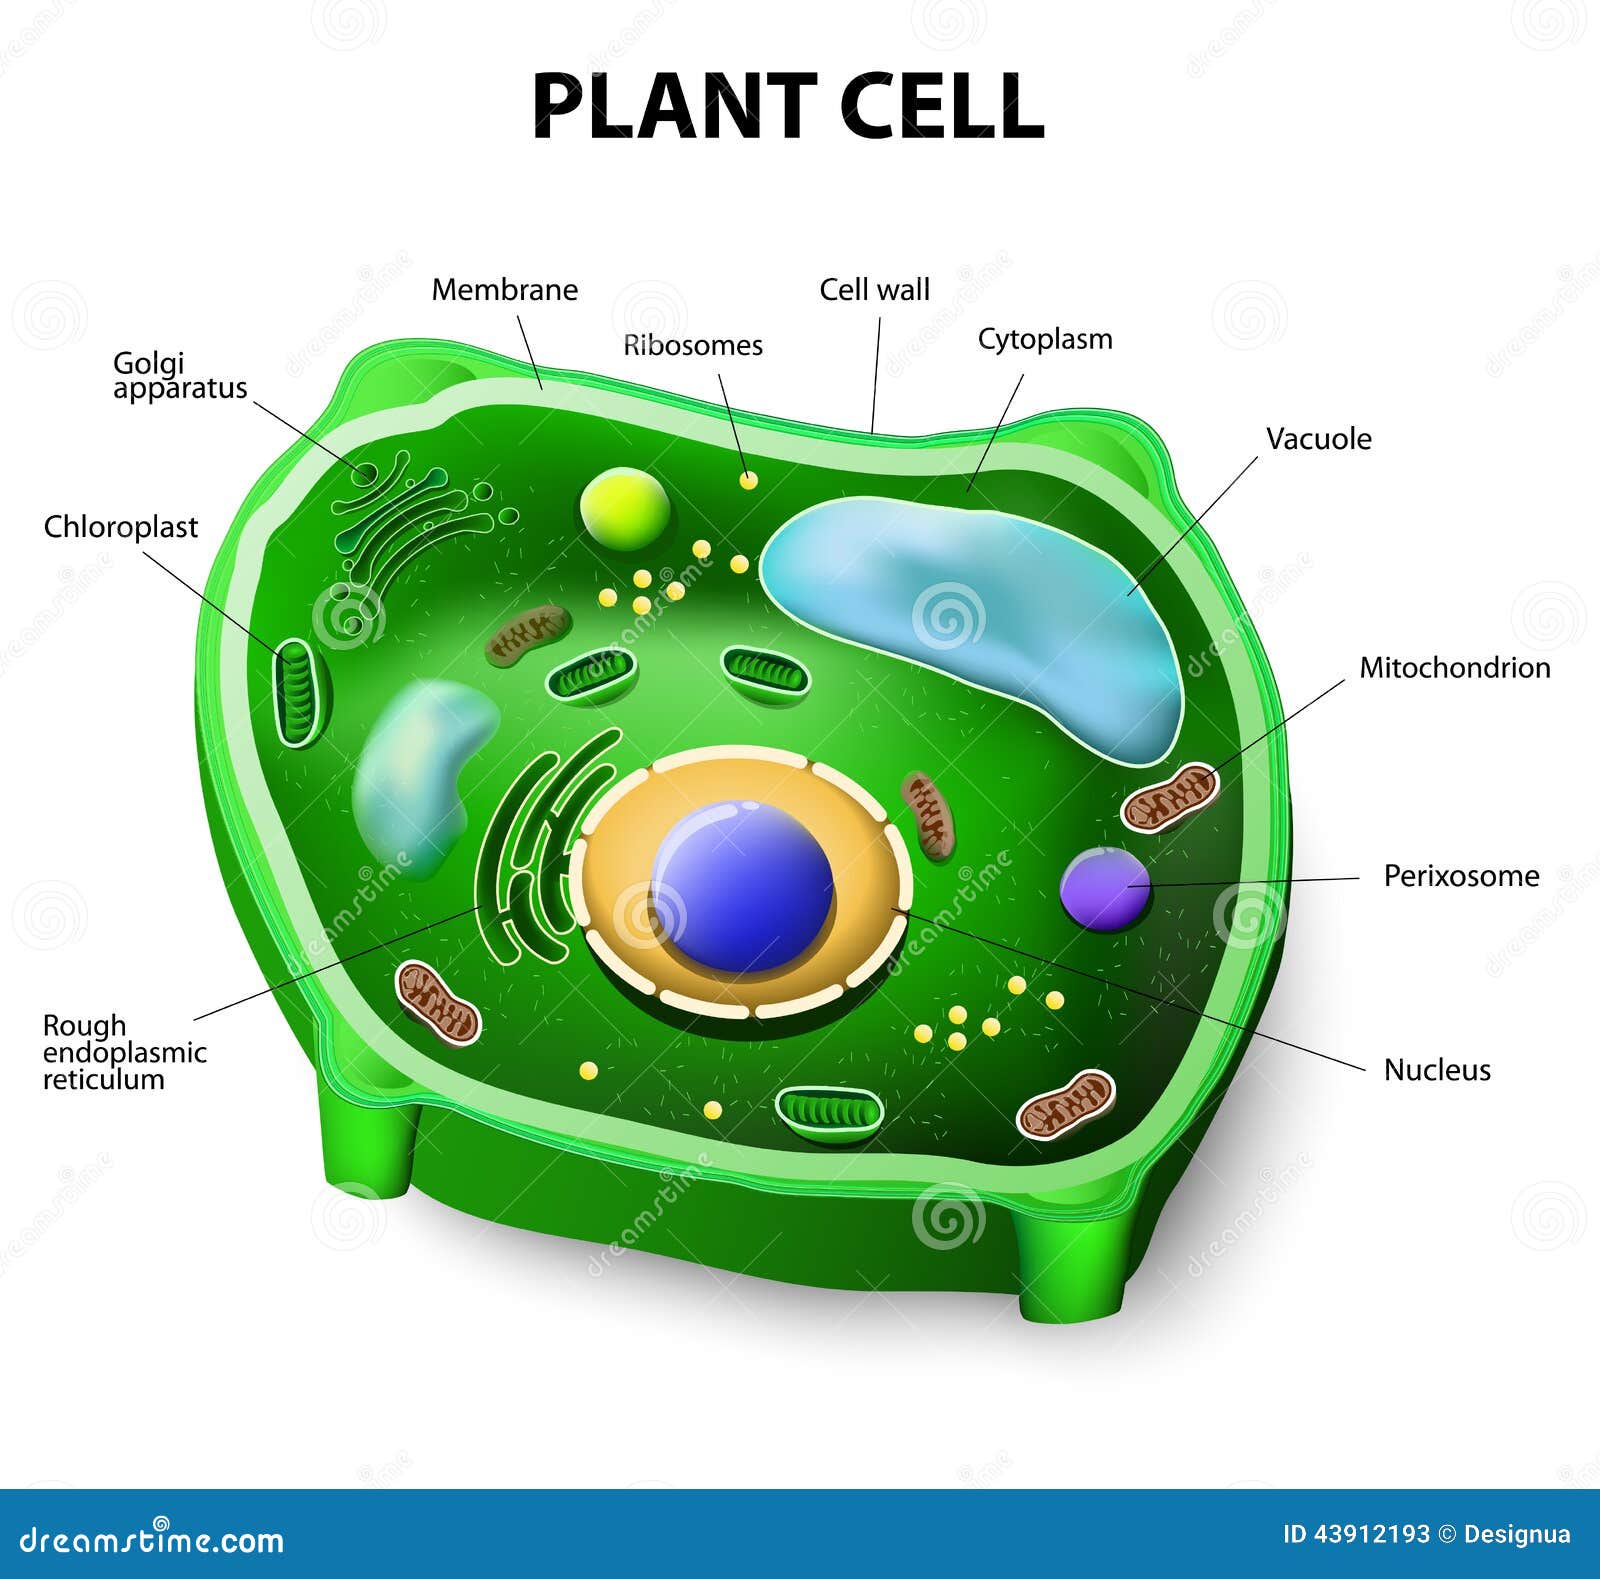 plant cell anatomy